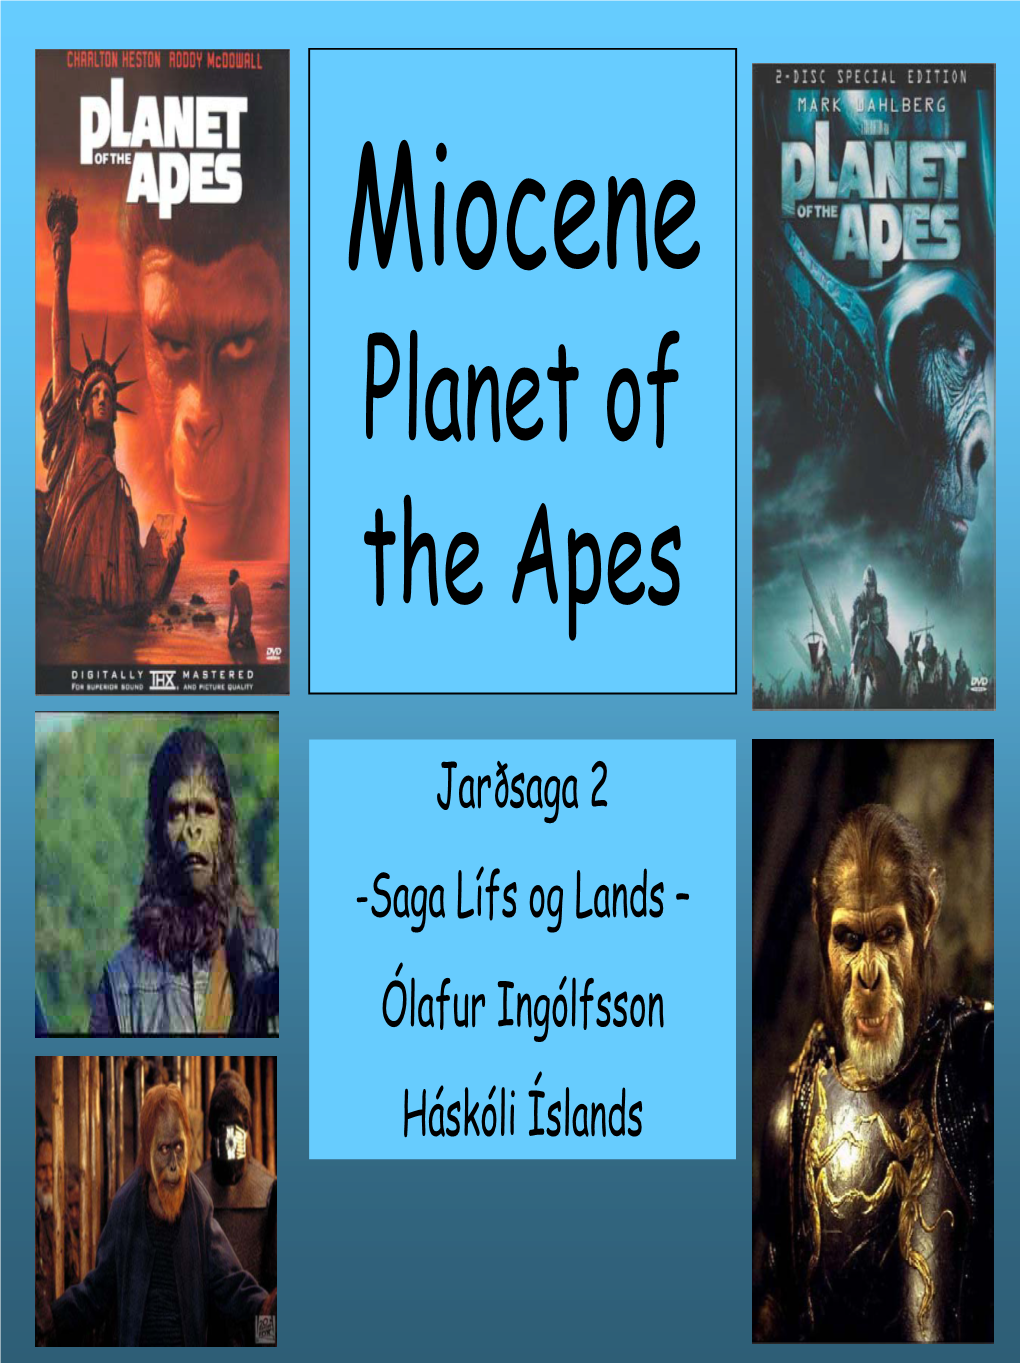 Miocene Planet of the Apes